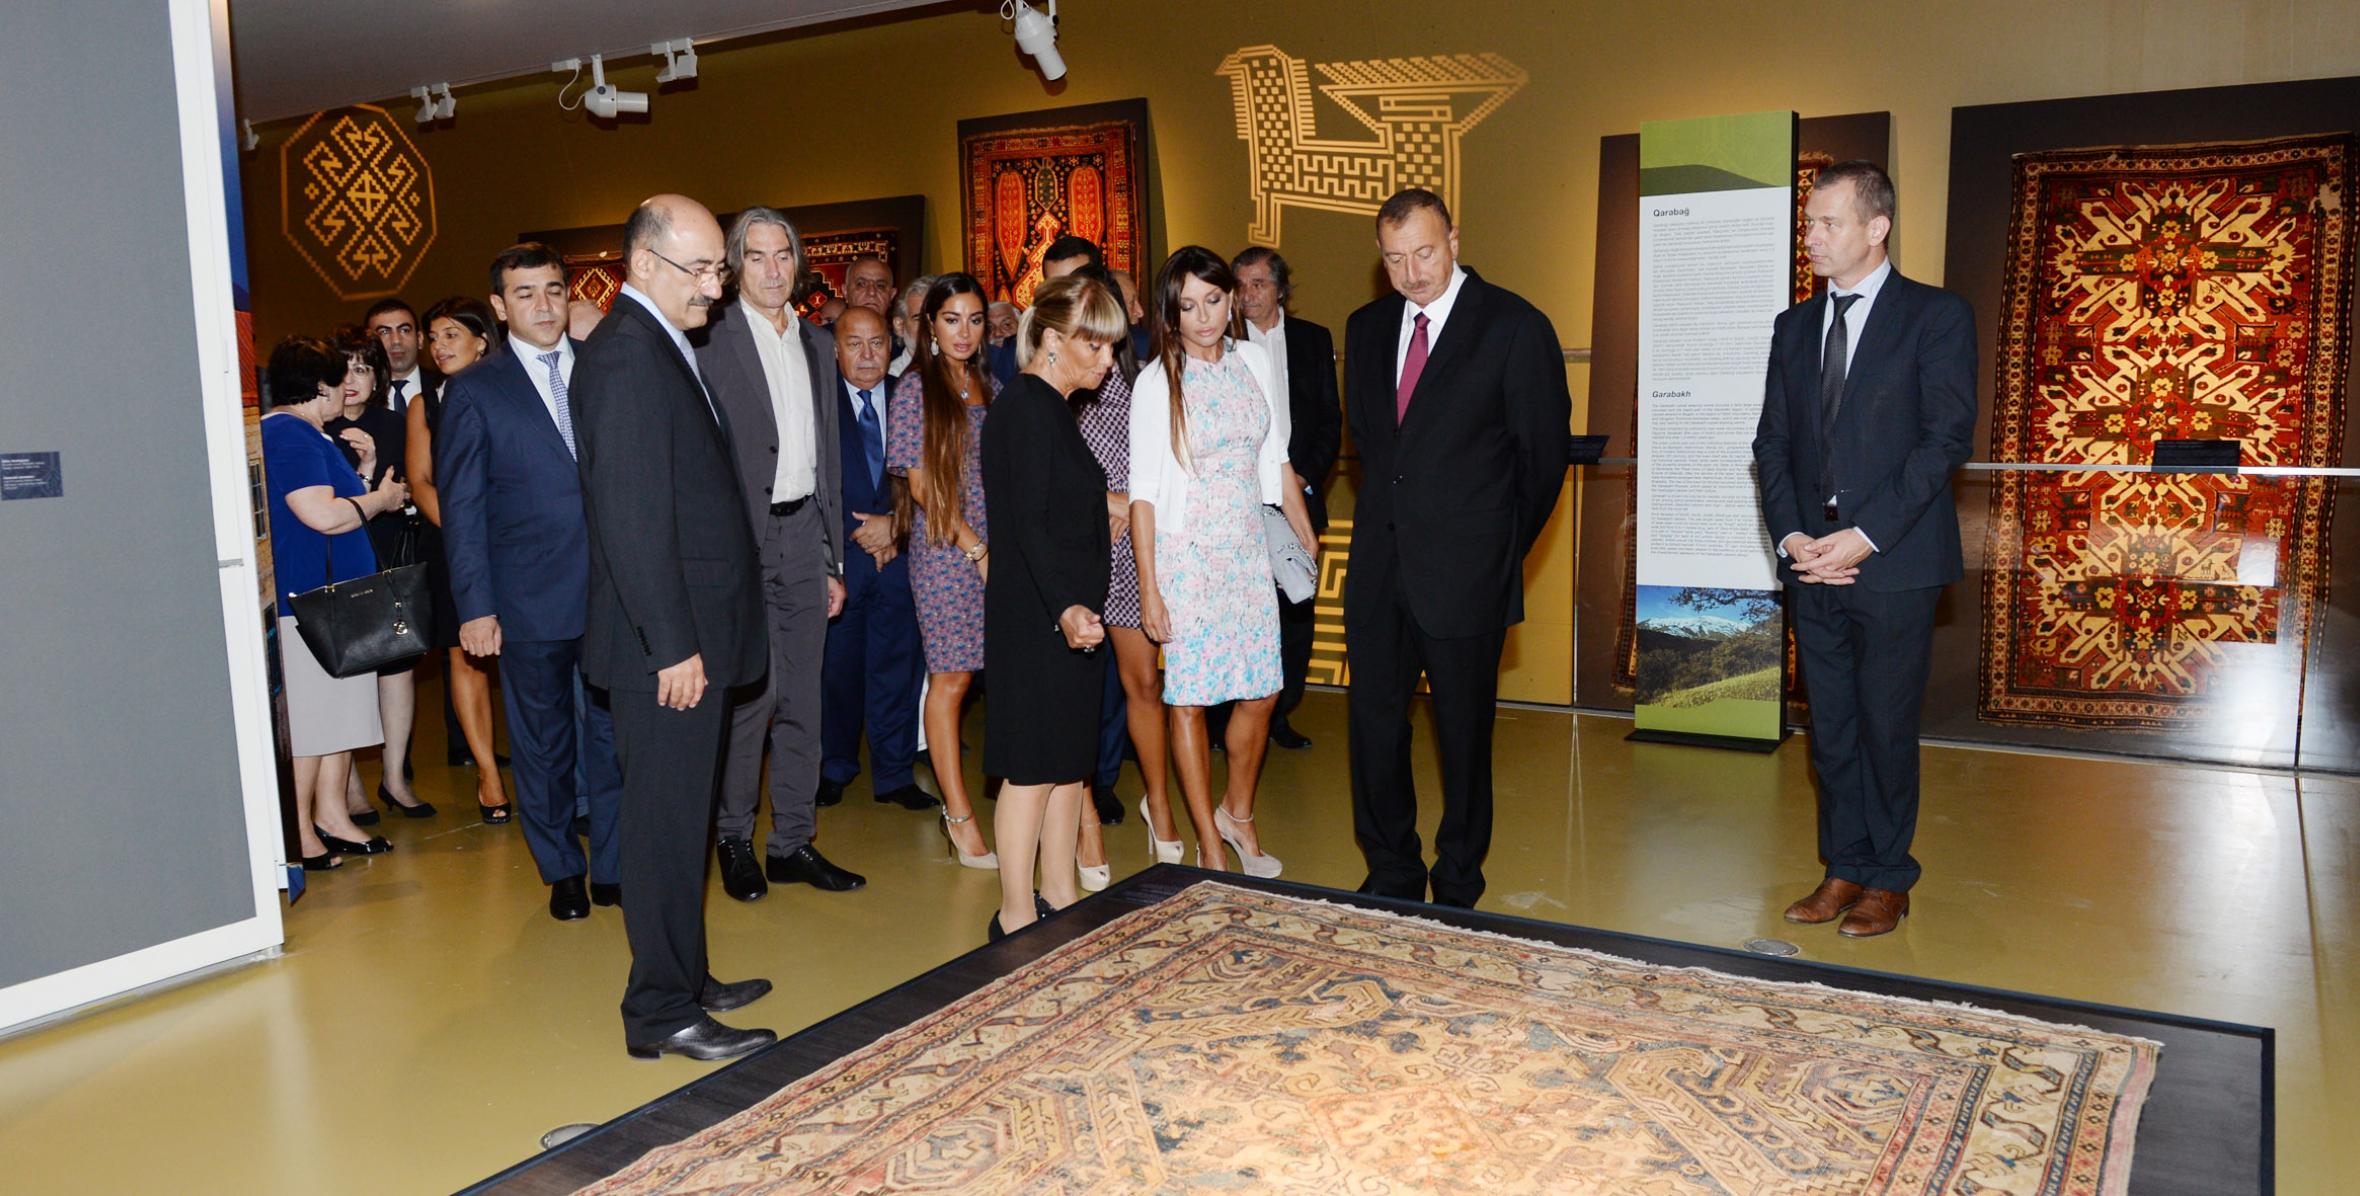 Ilham Aliyev attended the opening of the new building of the Azerbaijani Carpet Museum